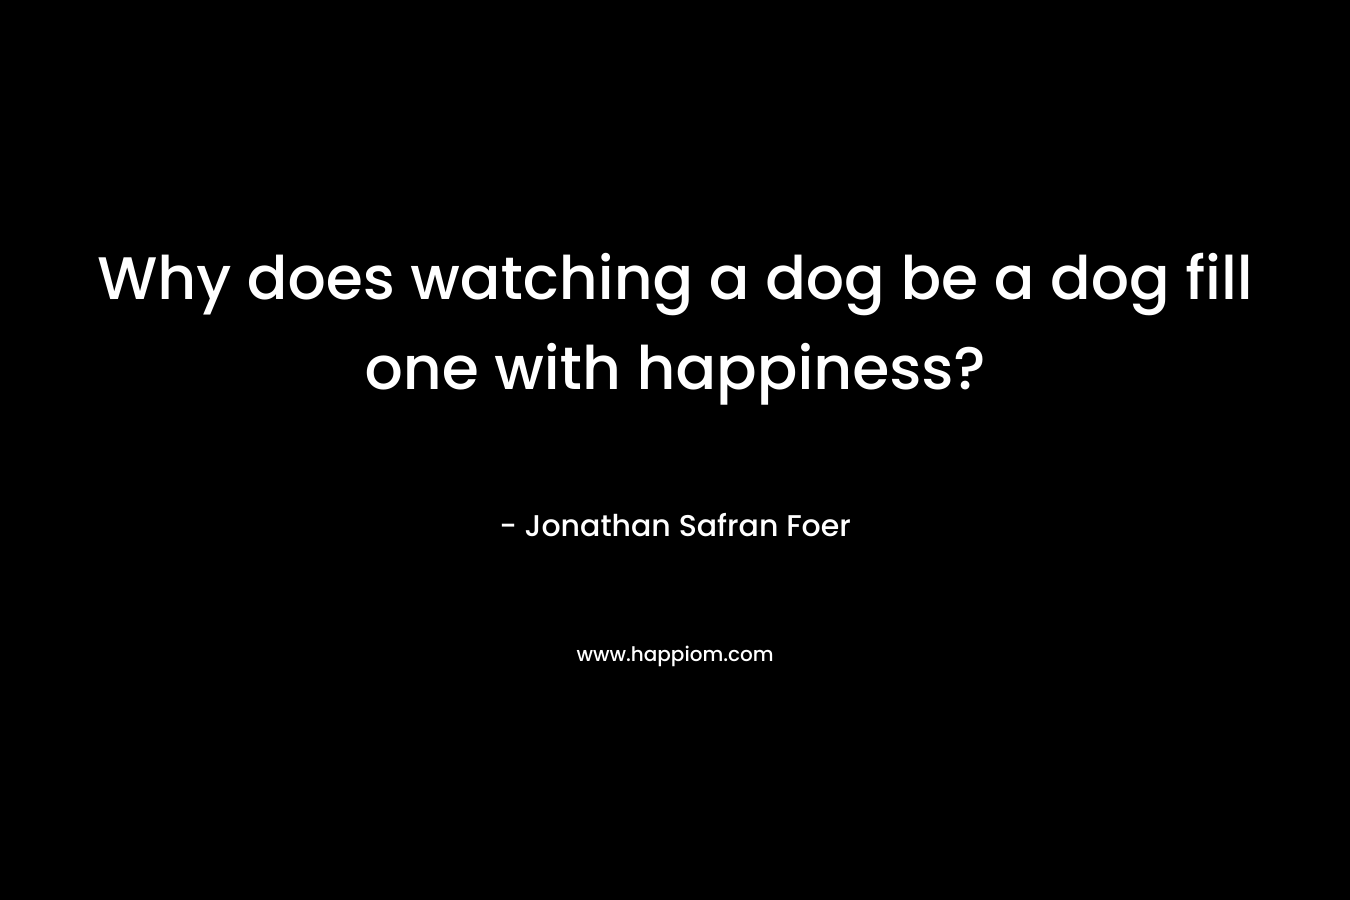 Why does watching a dog be a dog fill one with happiness?